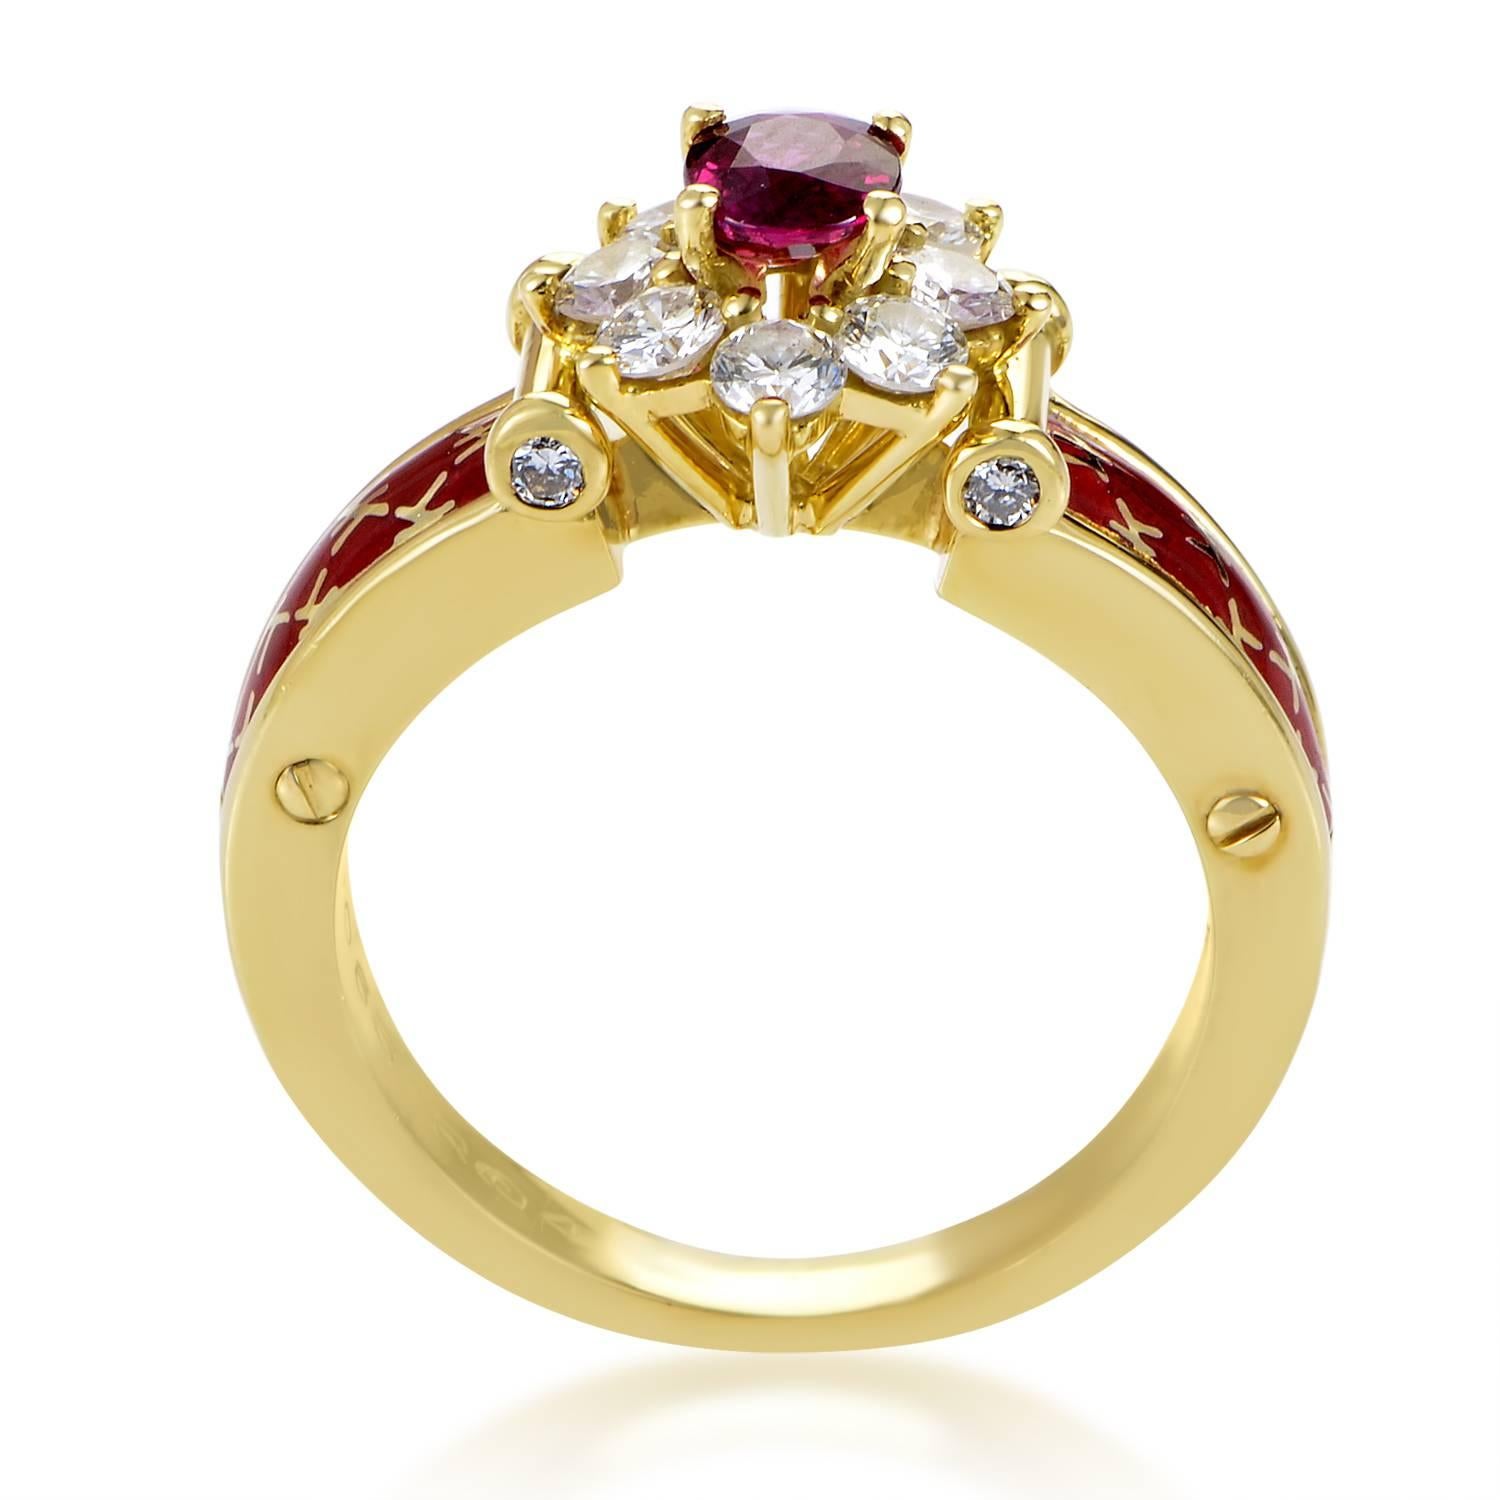 This ring from Korloff exudes an air of luxury that is without comparison. The ring is made of 18K yellow gold, and features shanks accented with a cherry-red enamel and Korloff insignia. The ring's main attraction however is a gorgeous flower motif